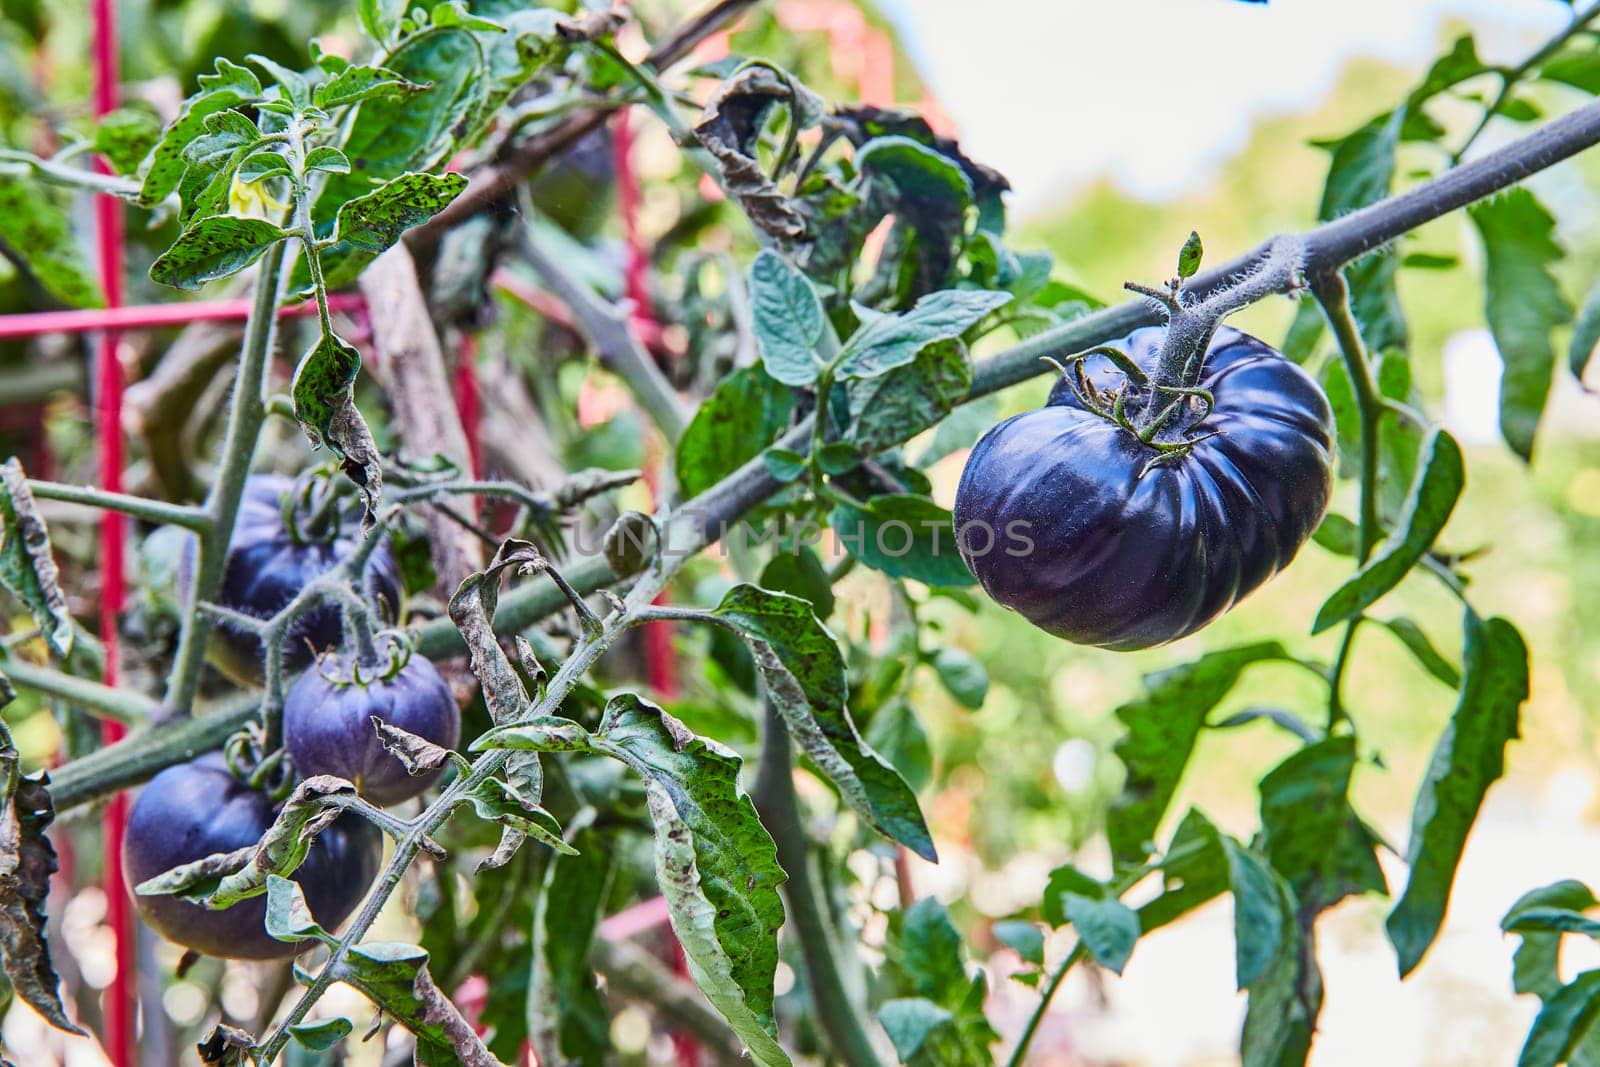 Unique black beauty tomatoes thriving in Indiana Botanic Gardens, 2023 - A fresh embodiment of organic farming and agricultural biodiversity.